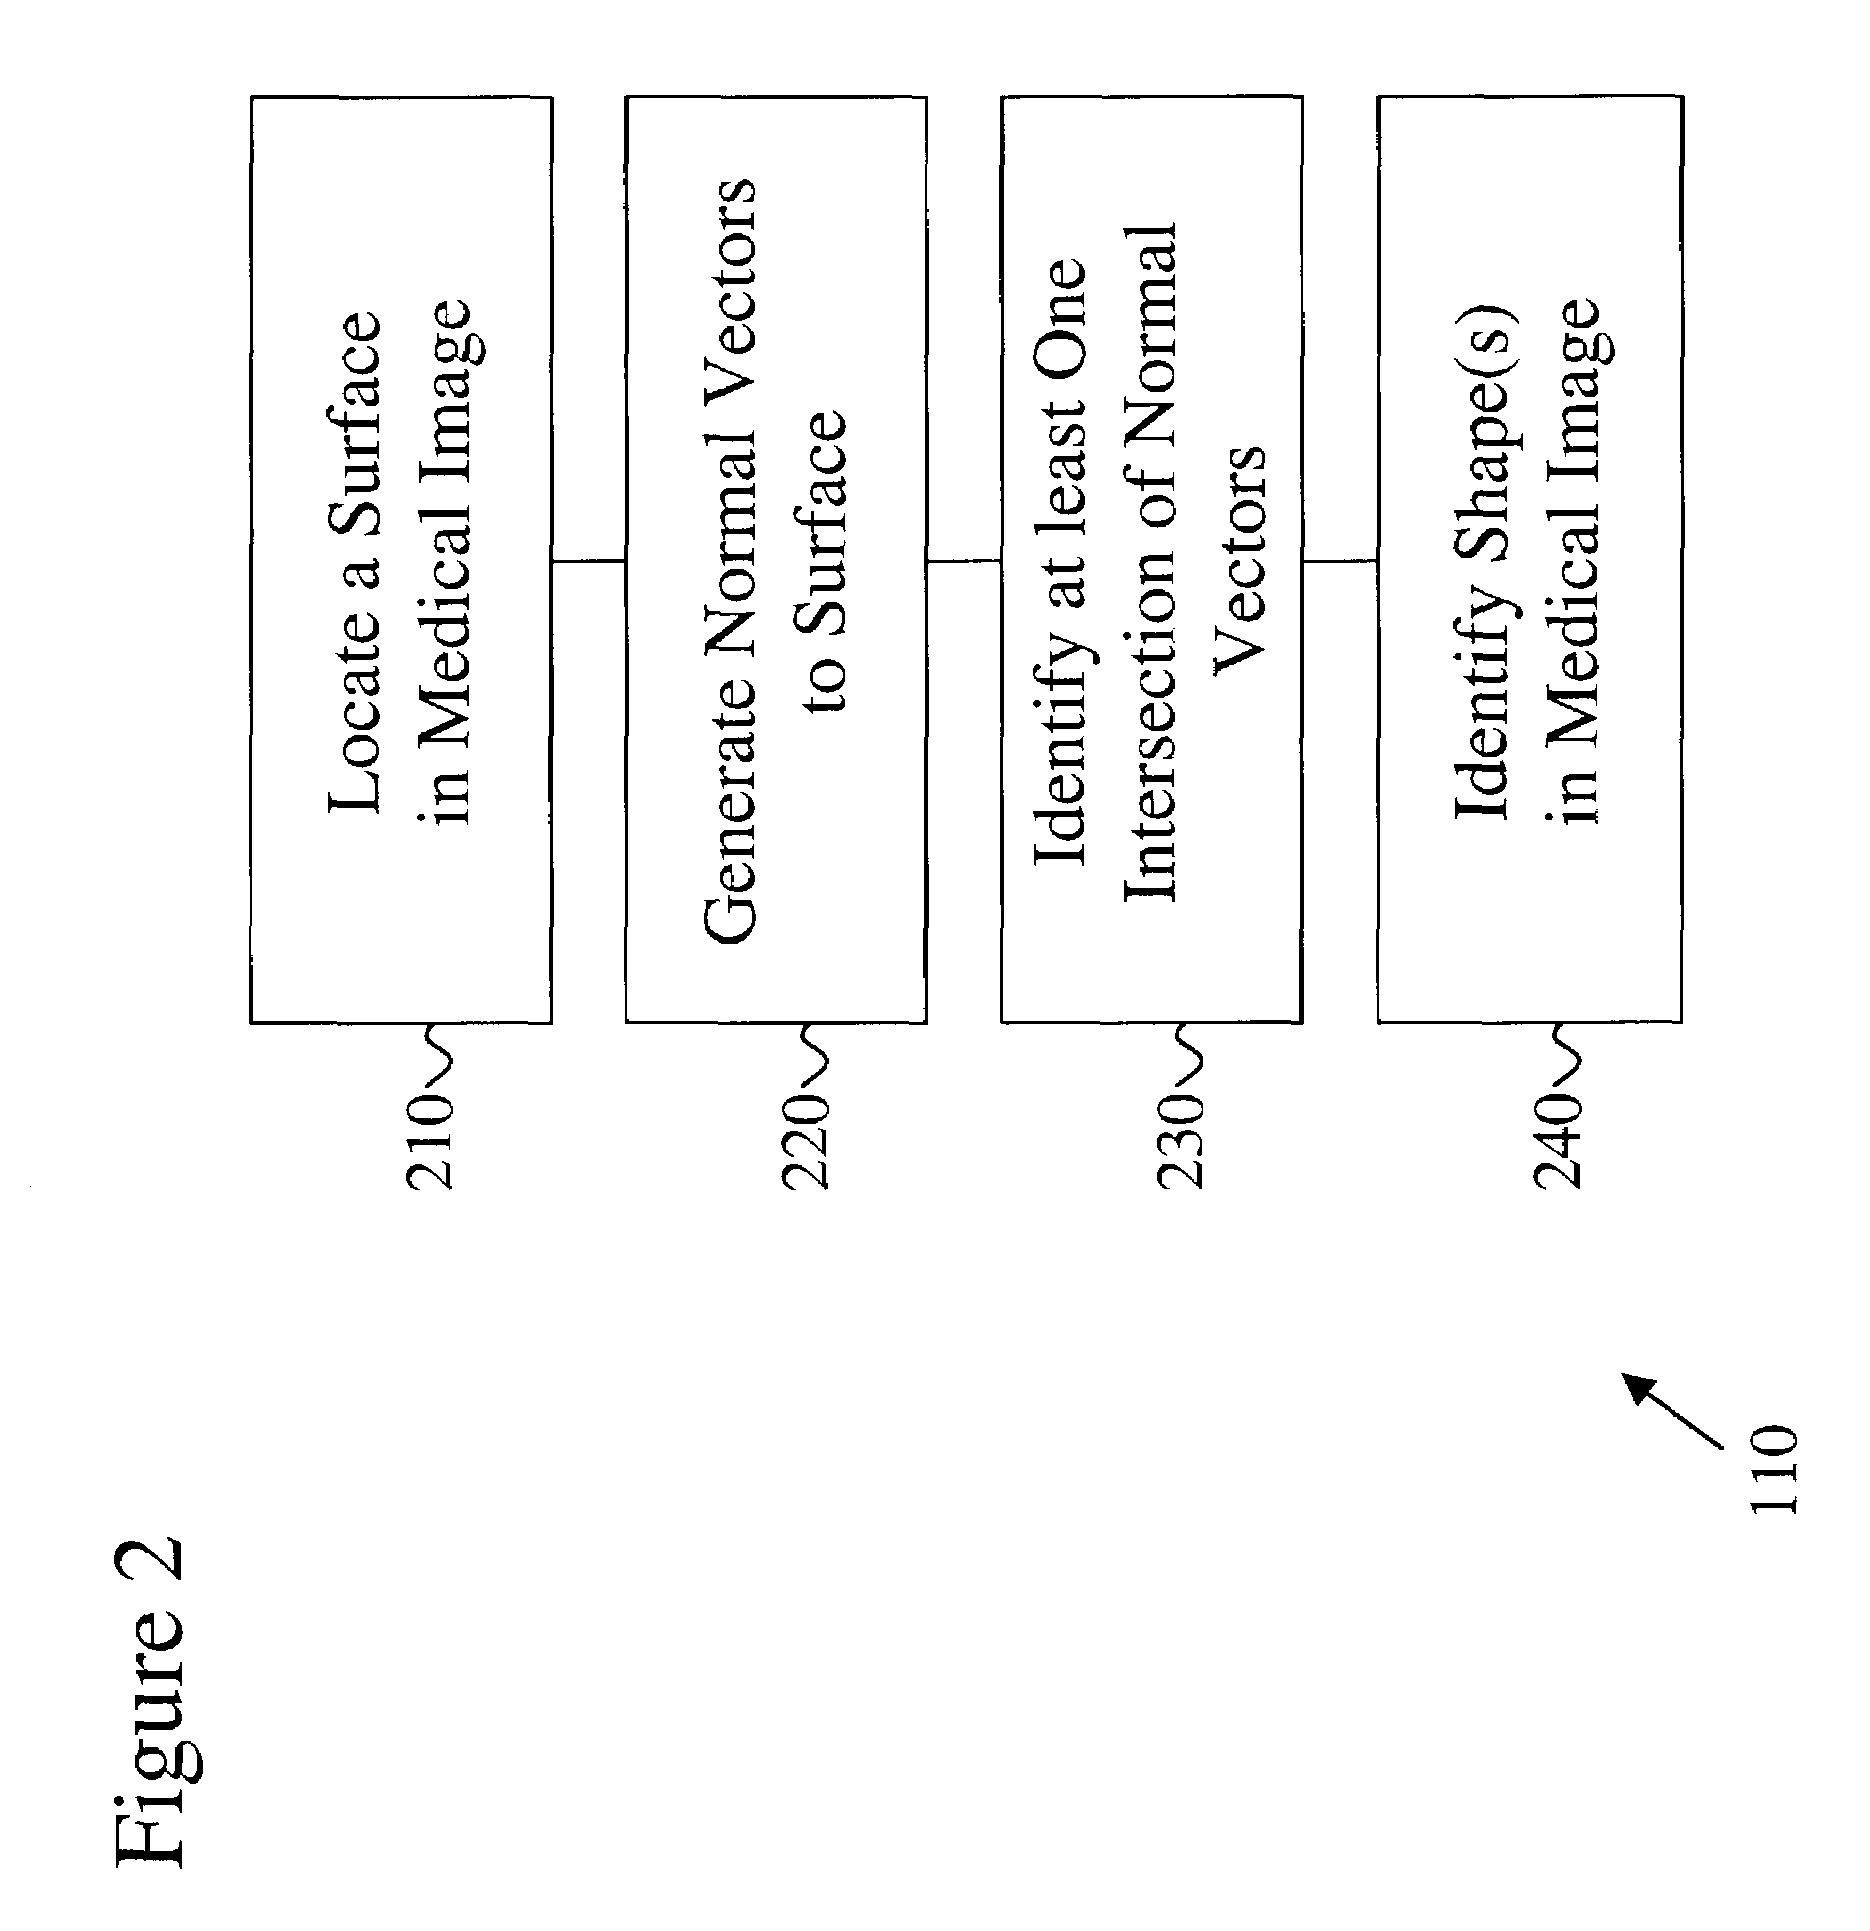 Method for characterizing shapes in medical images